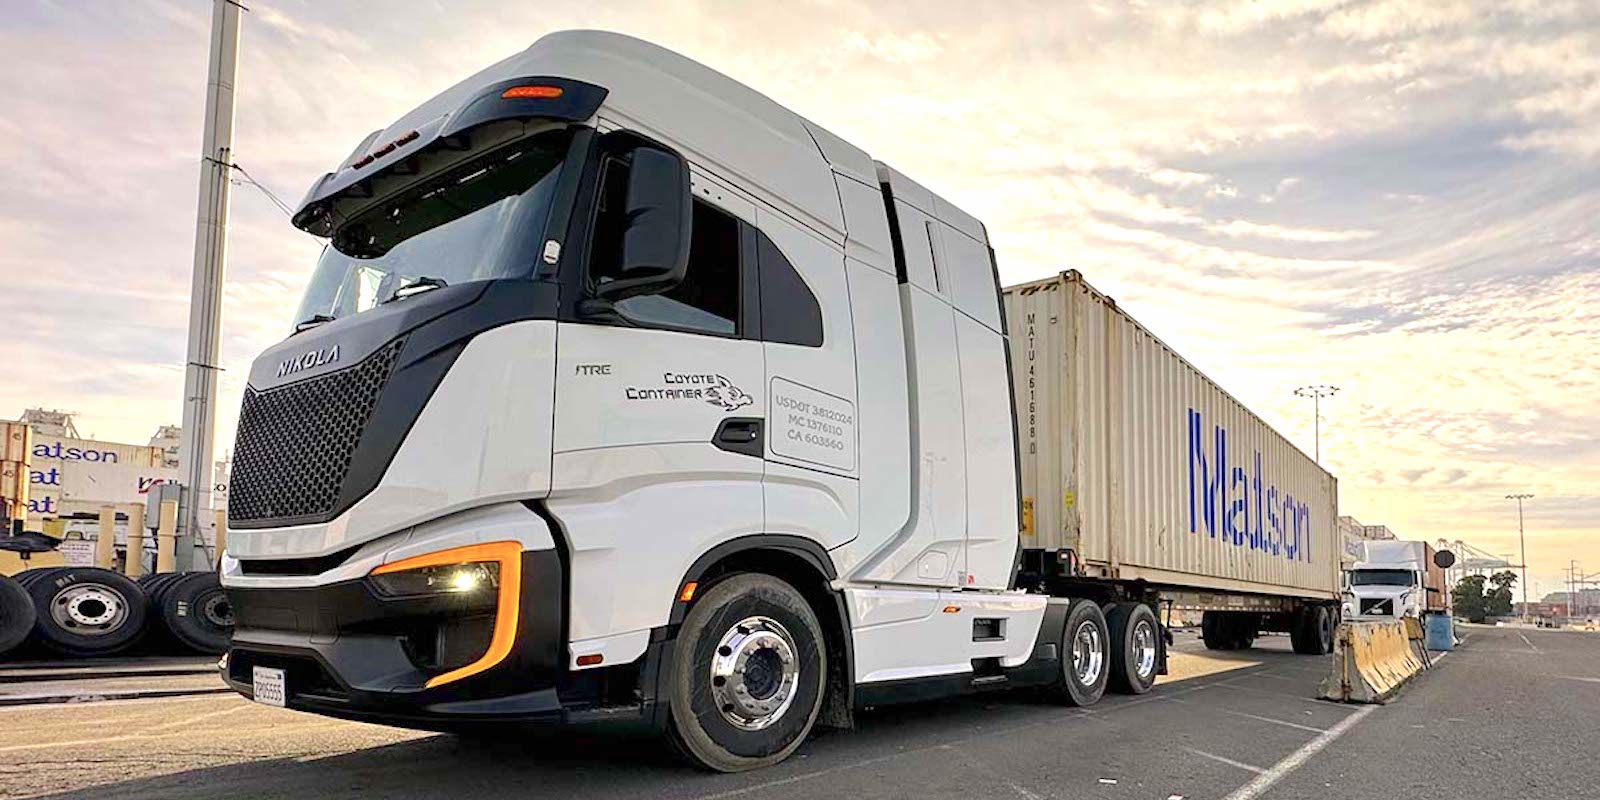 Coyote Container completes historic trip in fuel cell truck